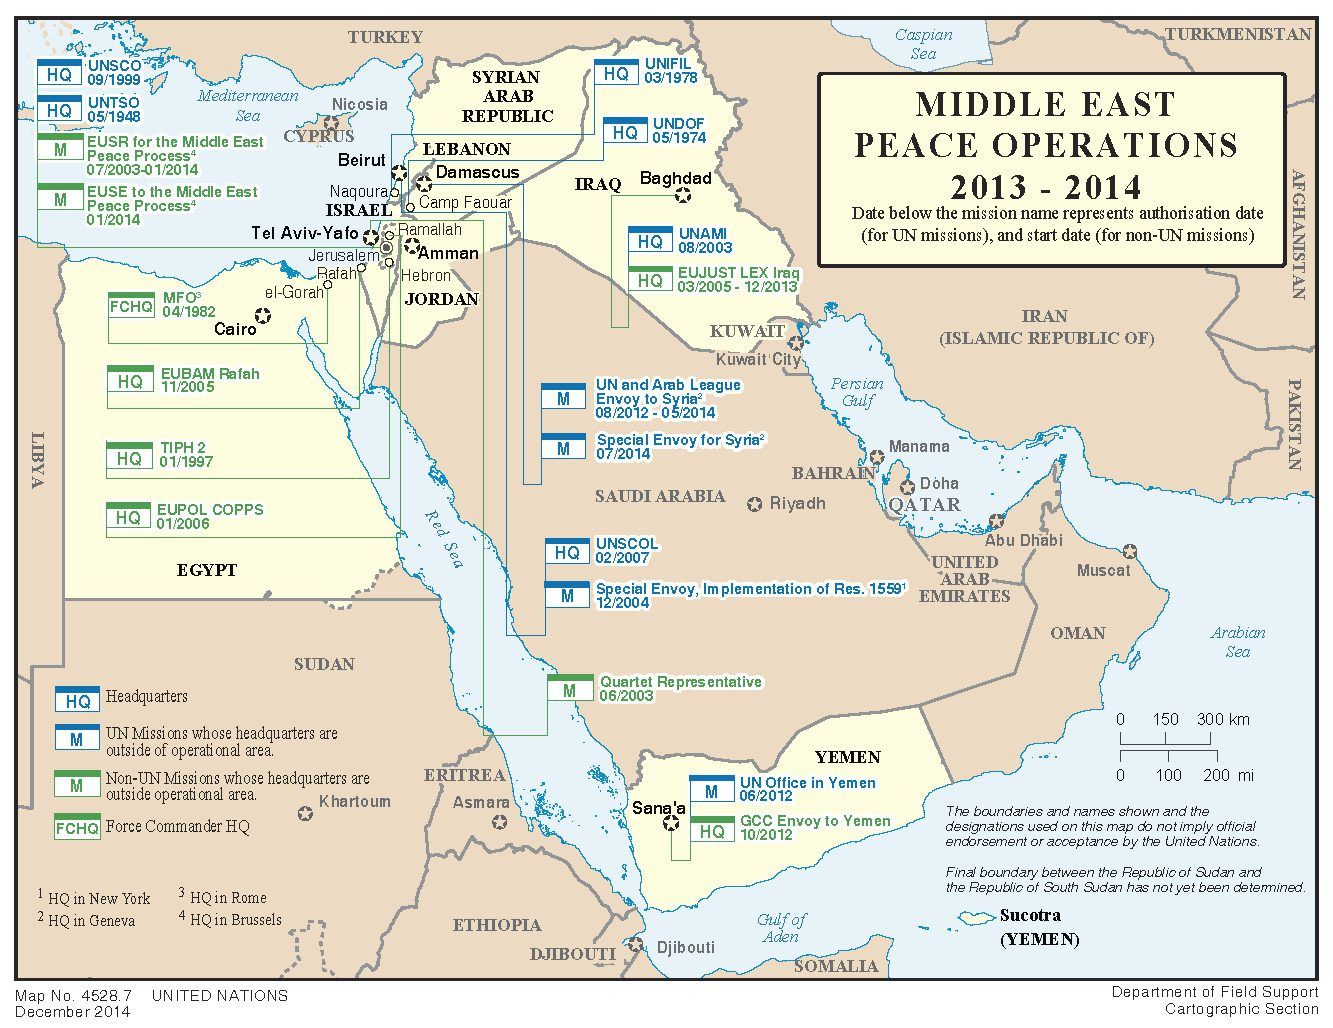 map of Middle East peace operations 2013-2014